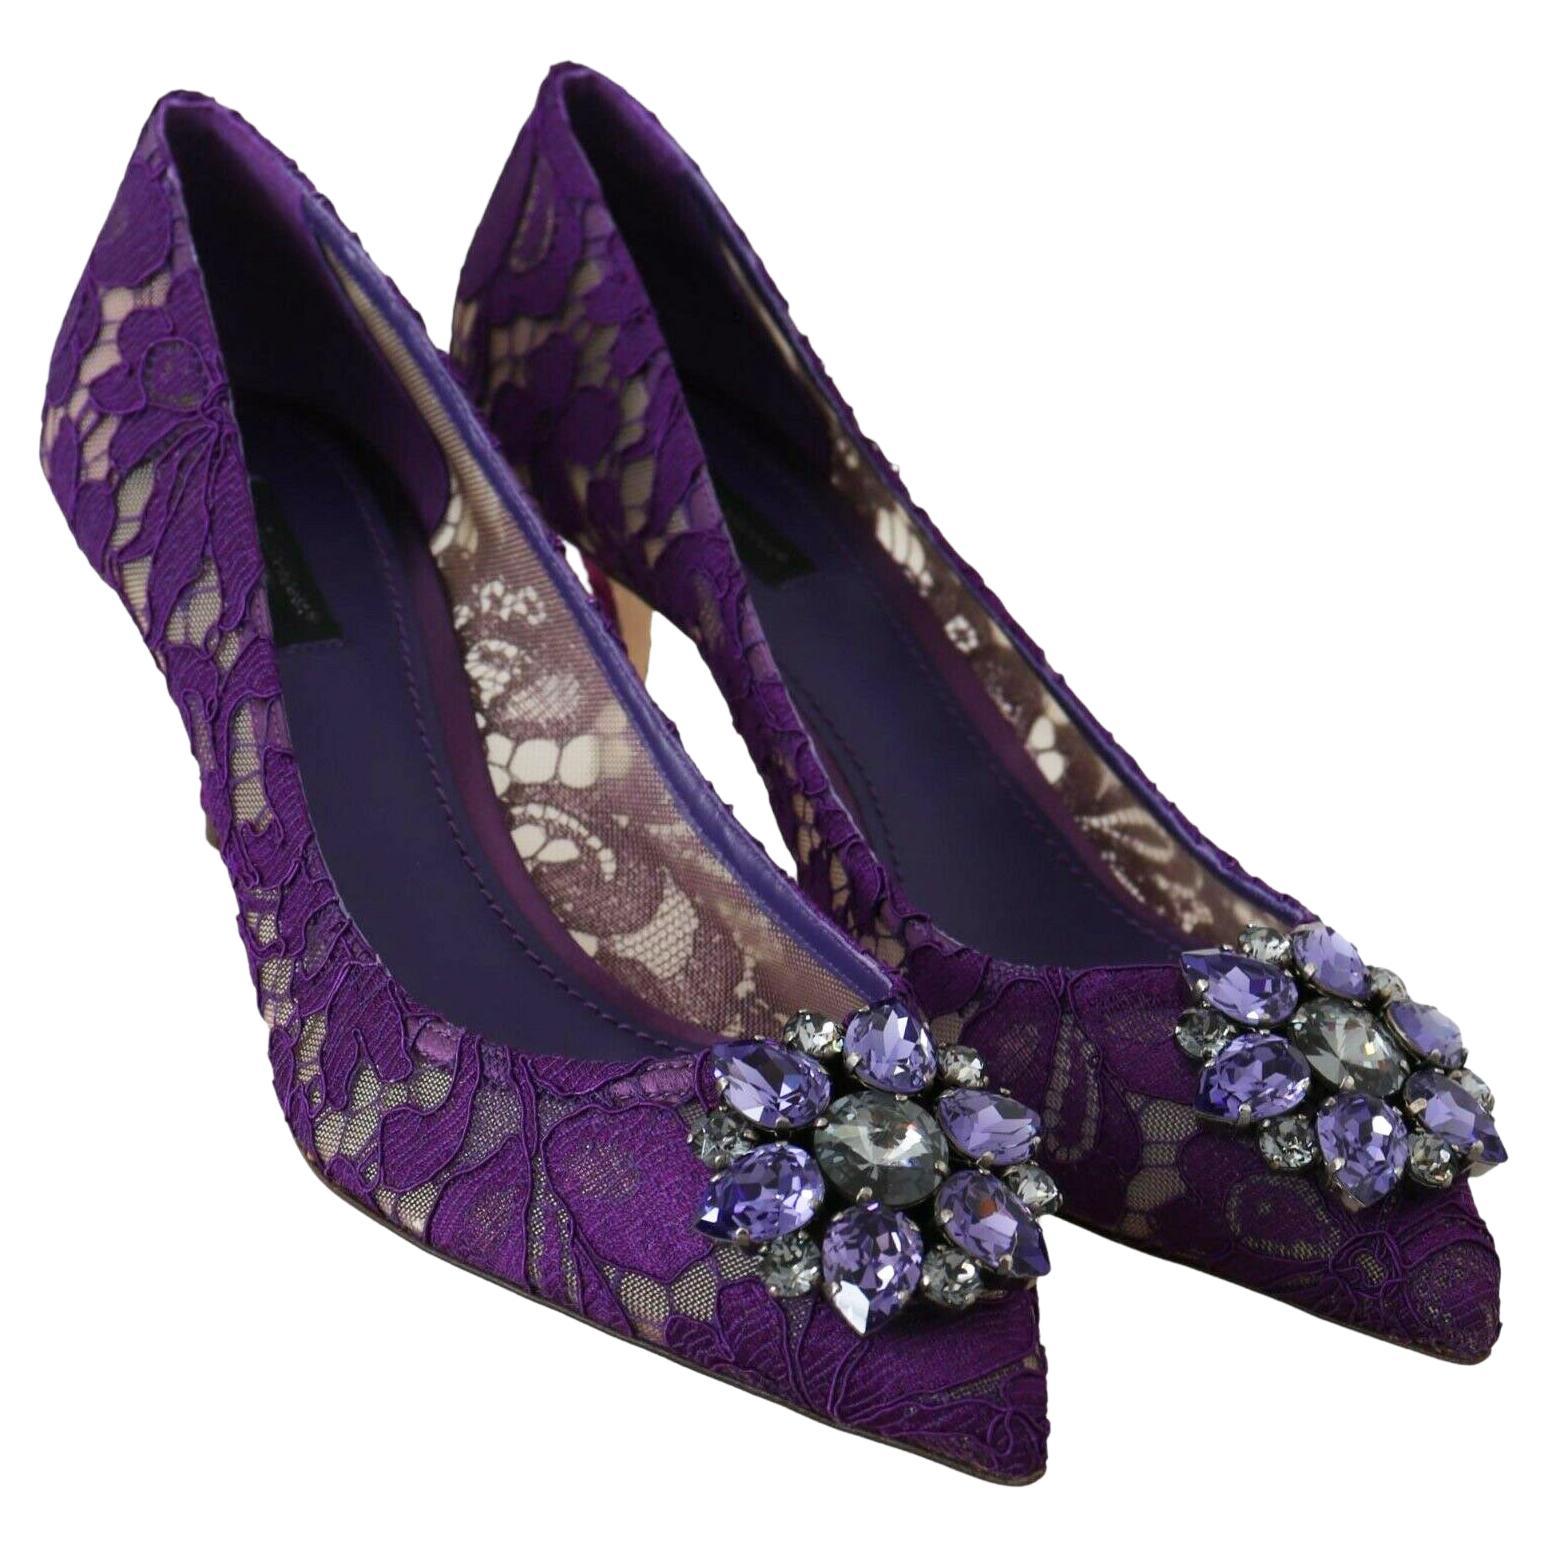  Dolce & Gabbana Purple Taormina Lace Crystal Pumps Shoes Heels Floral Rainbow For Sale